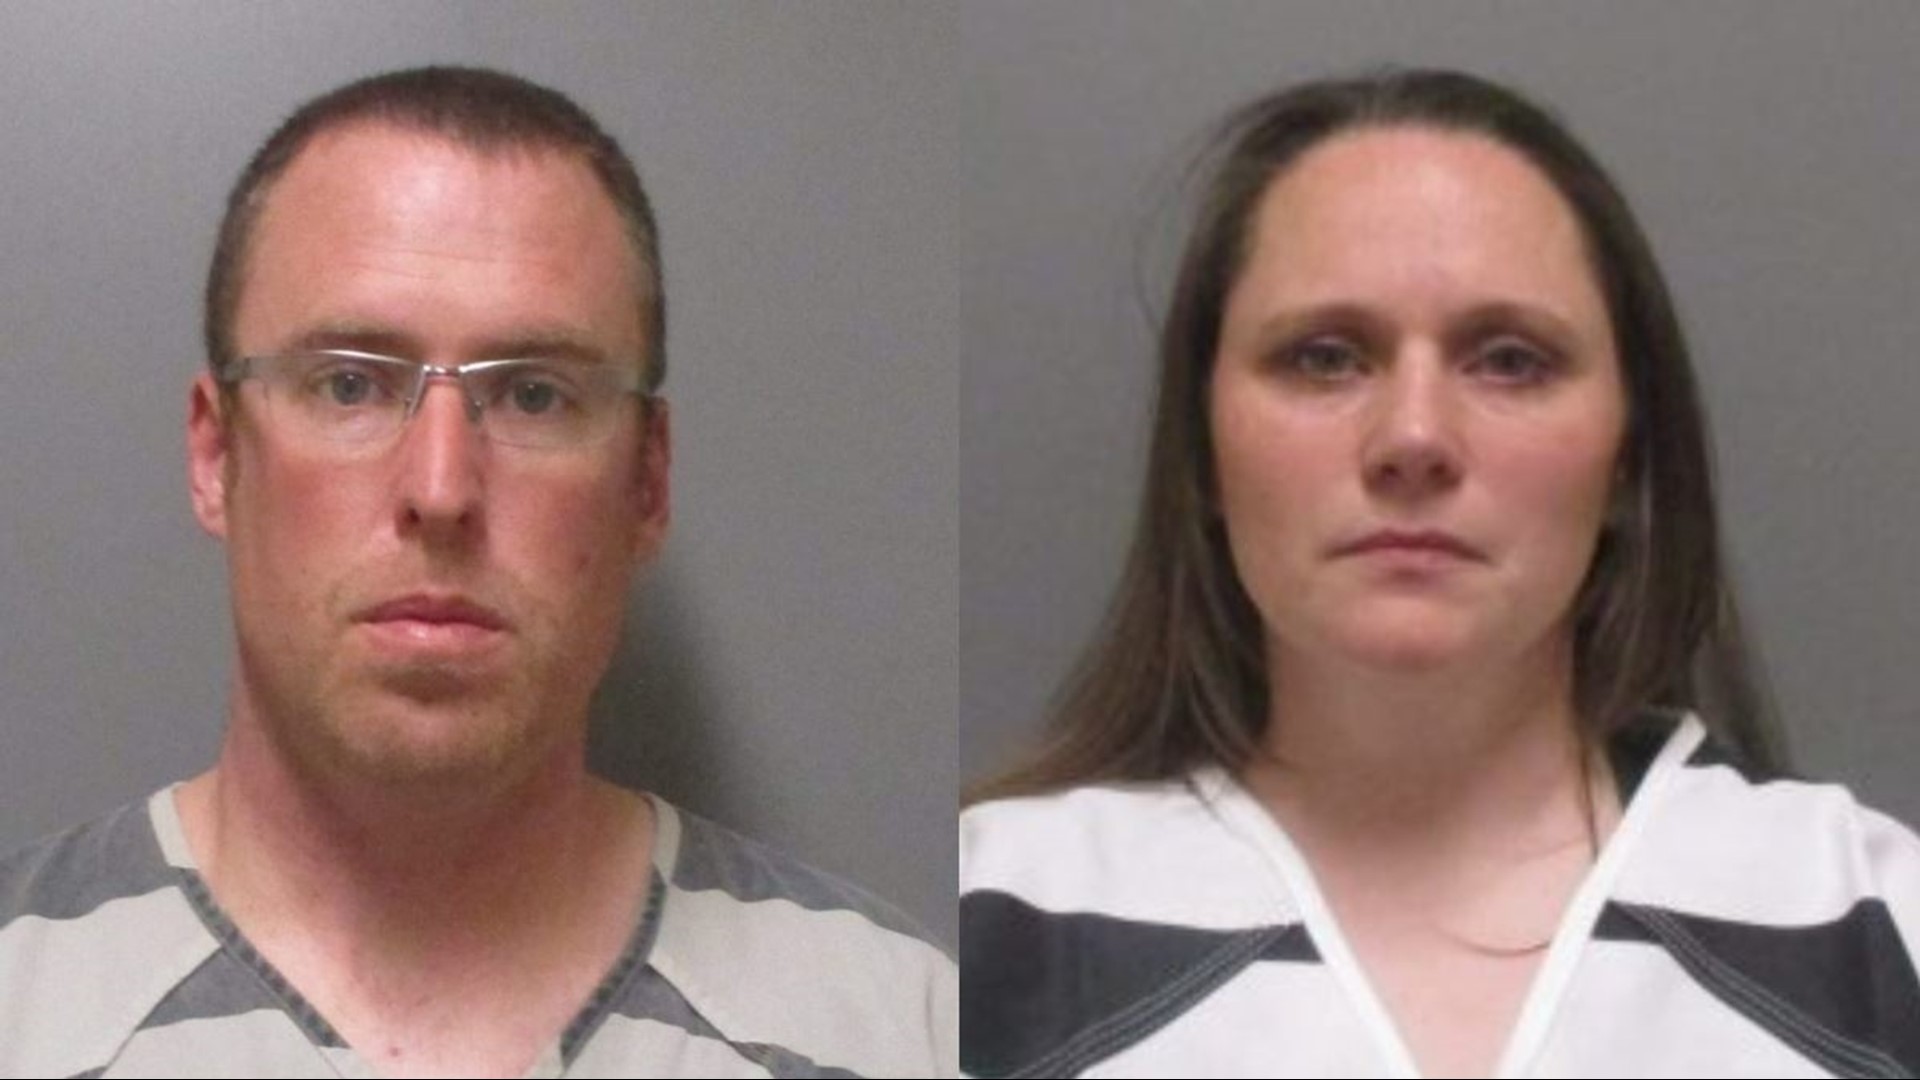 Caleb and Jill Haverdink both face multiple charges in connection to their alleged failure to stop and report sexual abuse occurring in their home.